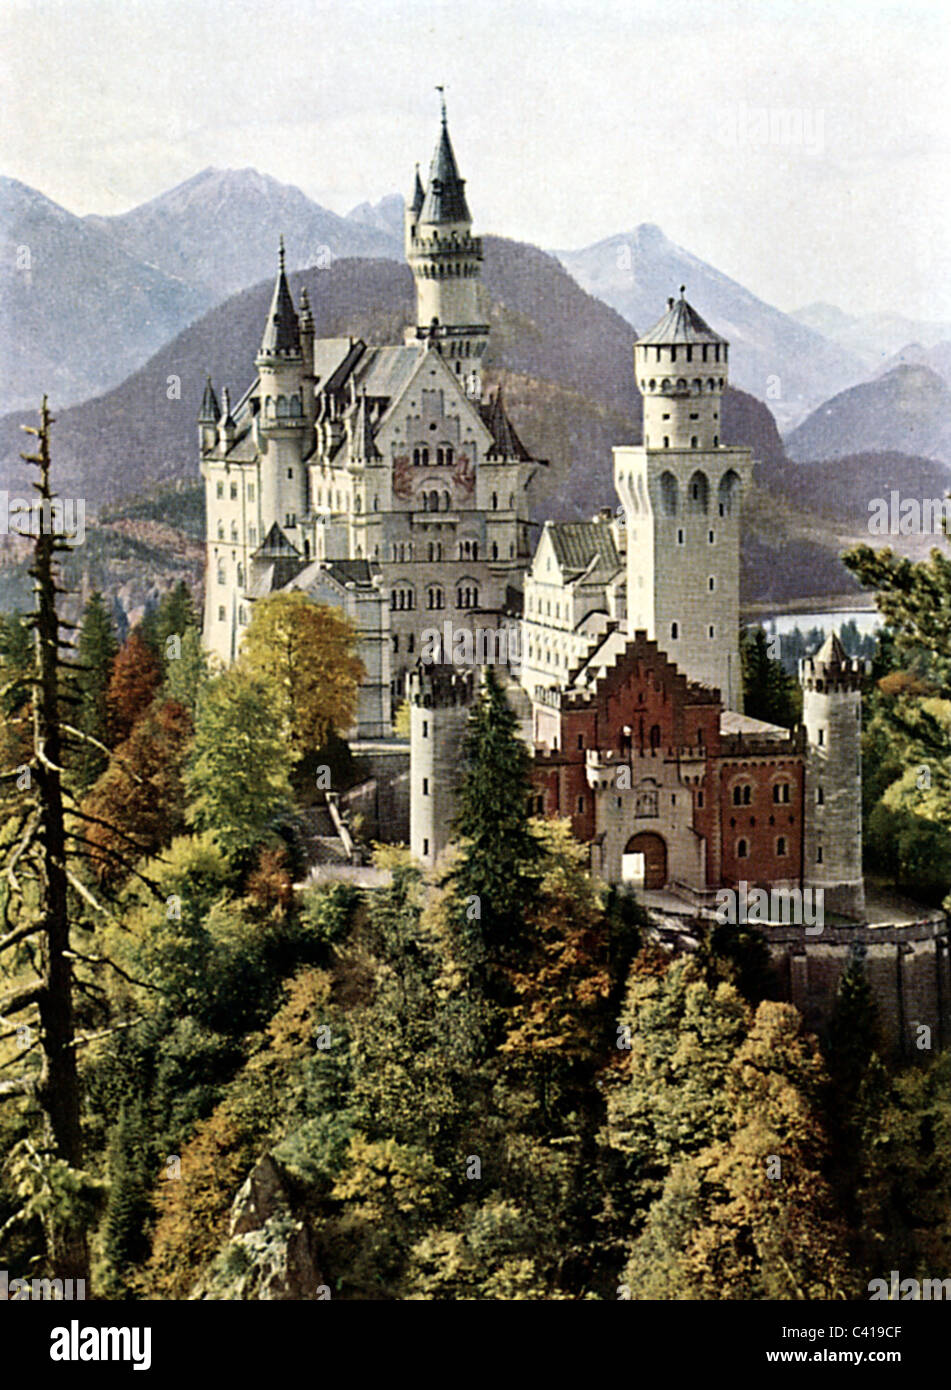 architecture, castles and palaces, Bavaria, Neuschwanstein Castle, built 1869 - 1886 by King Ludwig II, picture postcard, coloured, landscape, landscapes, mountain, mountains, wood, woods, Upper Bavaria, Wittelsbach, fairy-tale castle, Alps, high Alps, typical of this country, customary, historic, historical, landmark, landmarks, sights, sight, 19th century, Additional-Rights-Clearences-Not Available Stock Photo